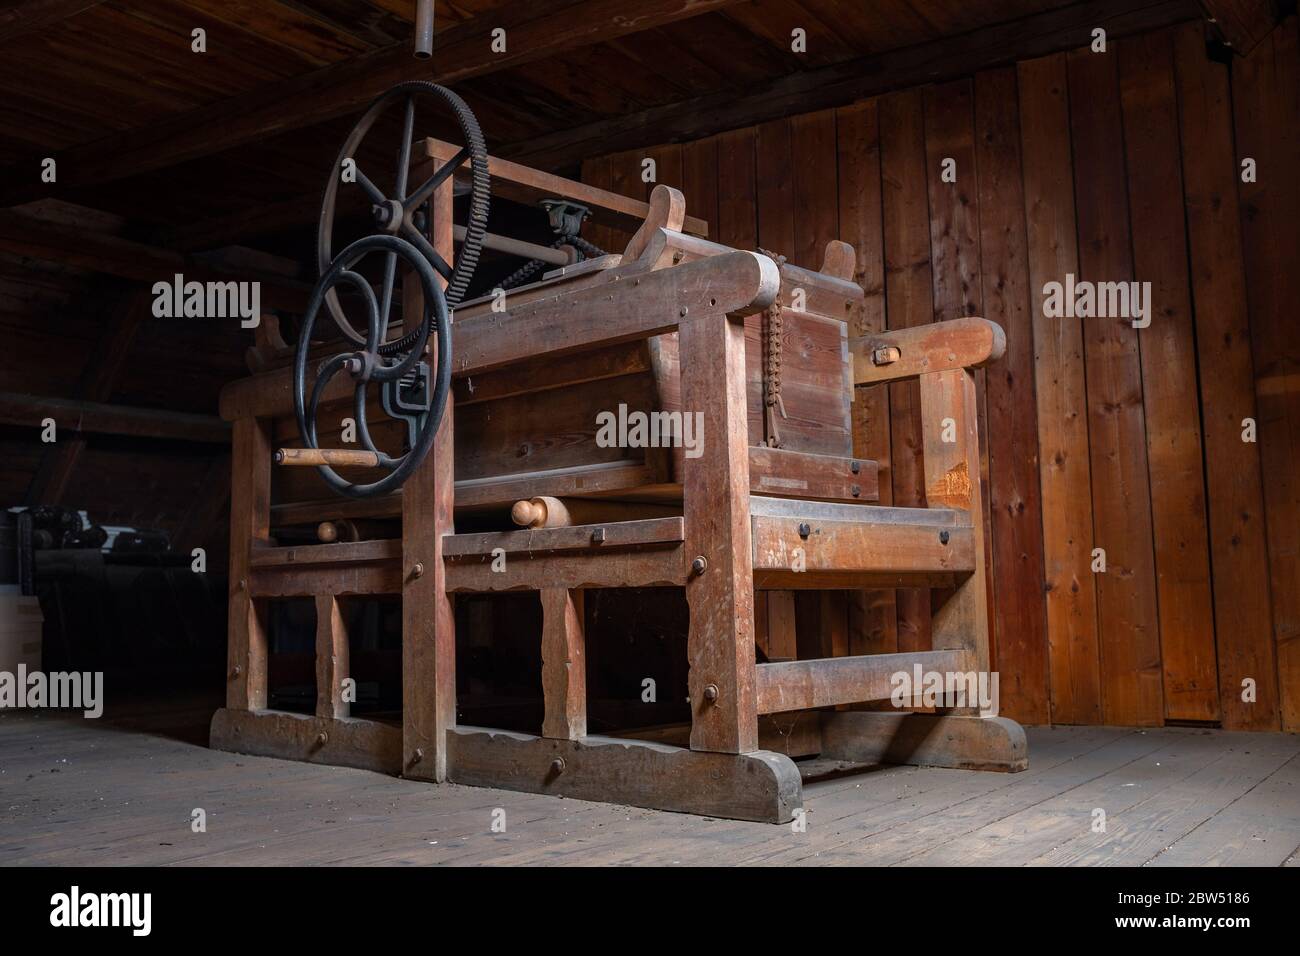 Antiquity - Historical German clothes wringer (mangle) in the attic Stock Photo